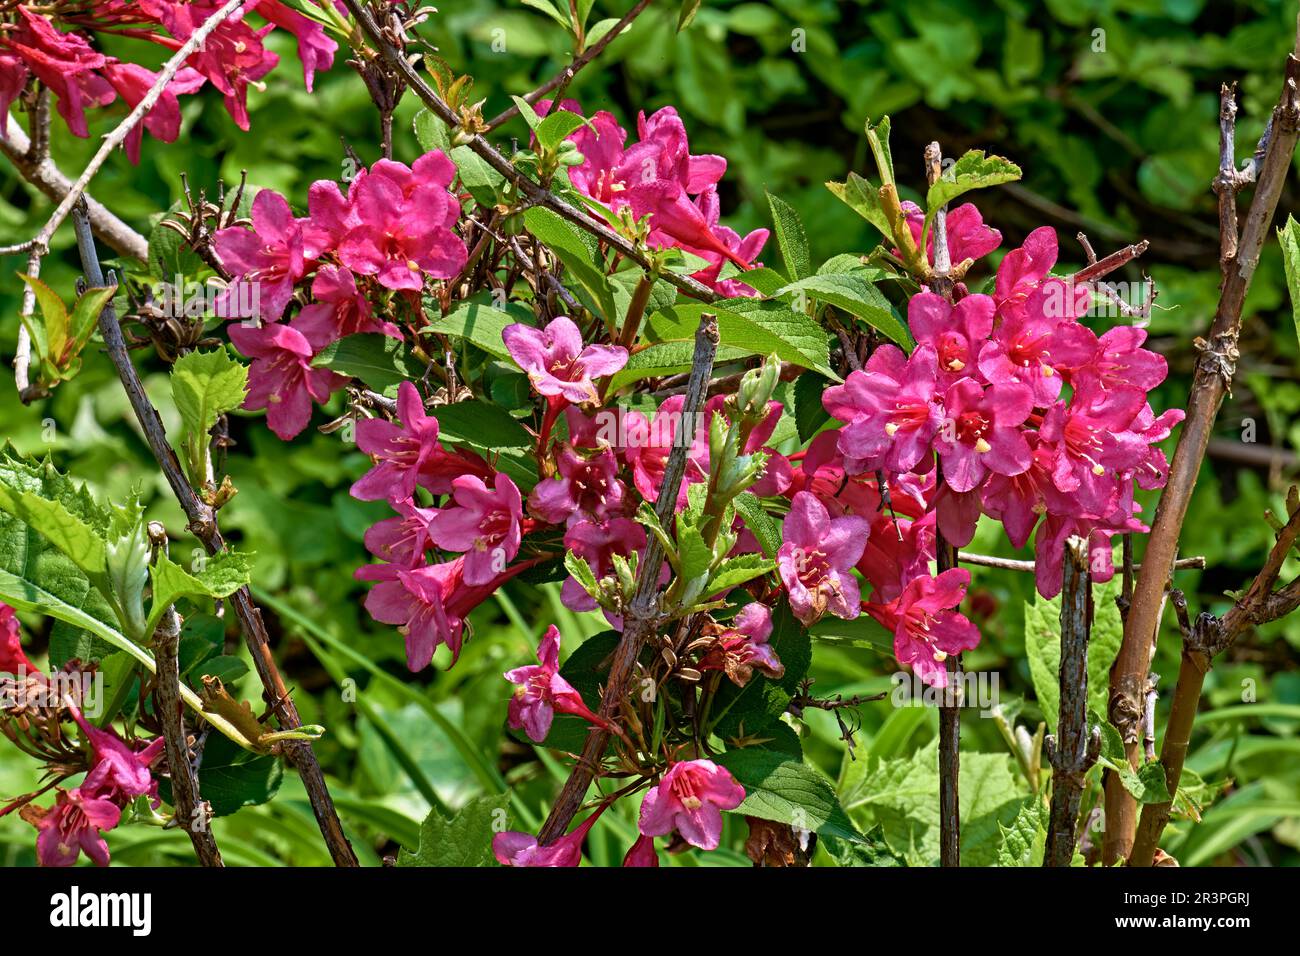 Java Red Weigela with deep red flower buds that open to rosy, trumpet-shaped flowers. Native to northern China, Korea and Japan. Stock Photo